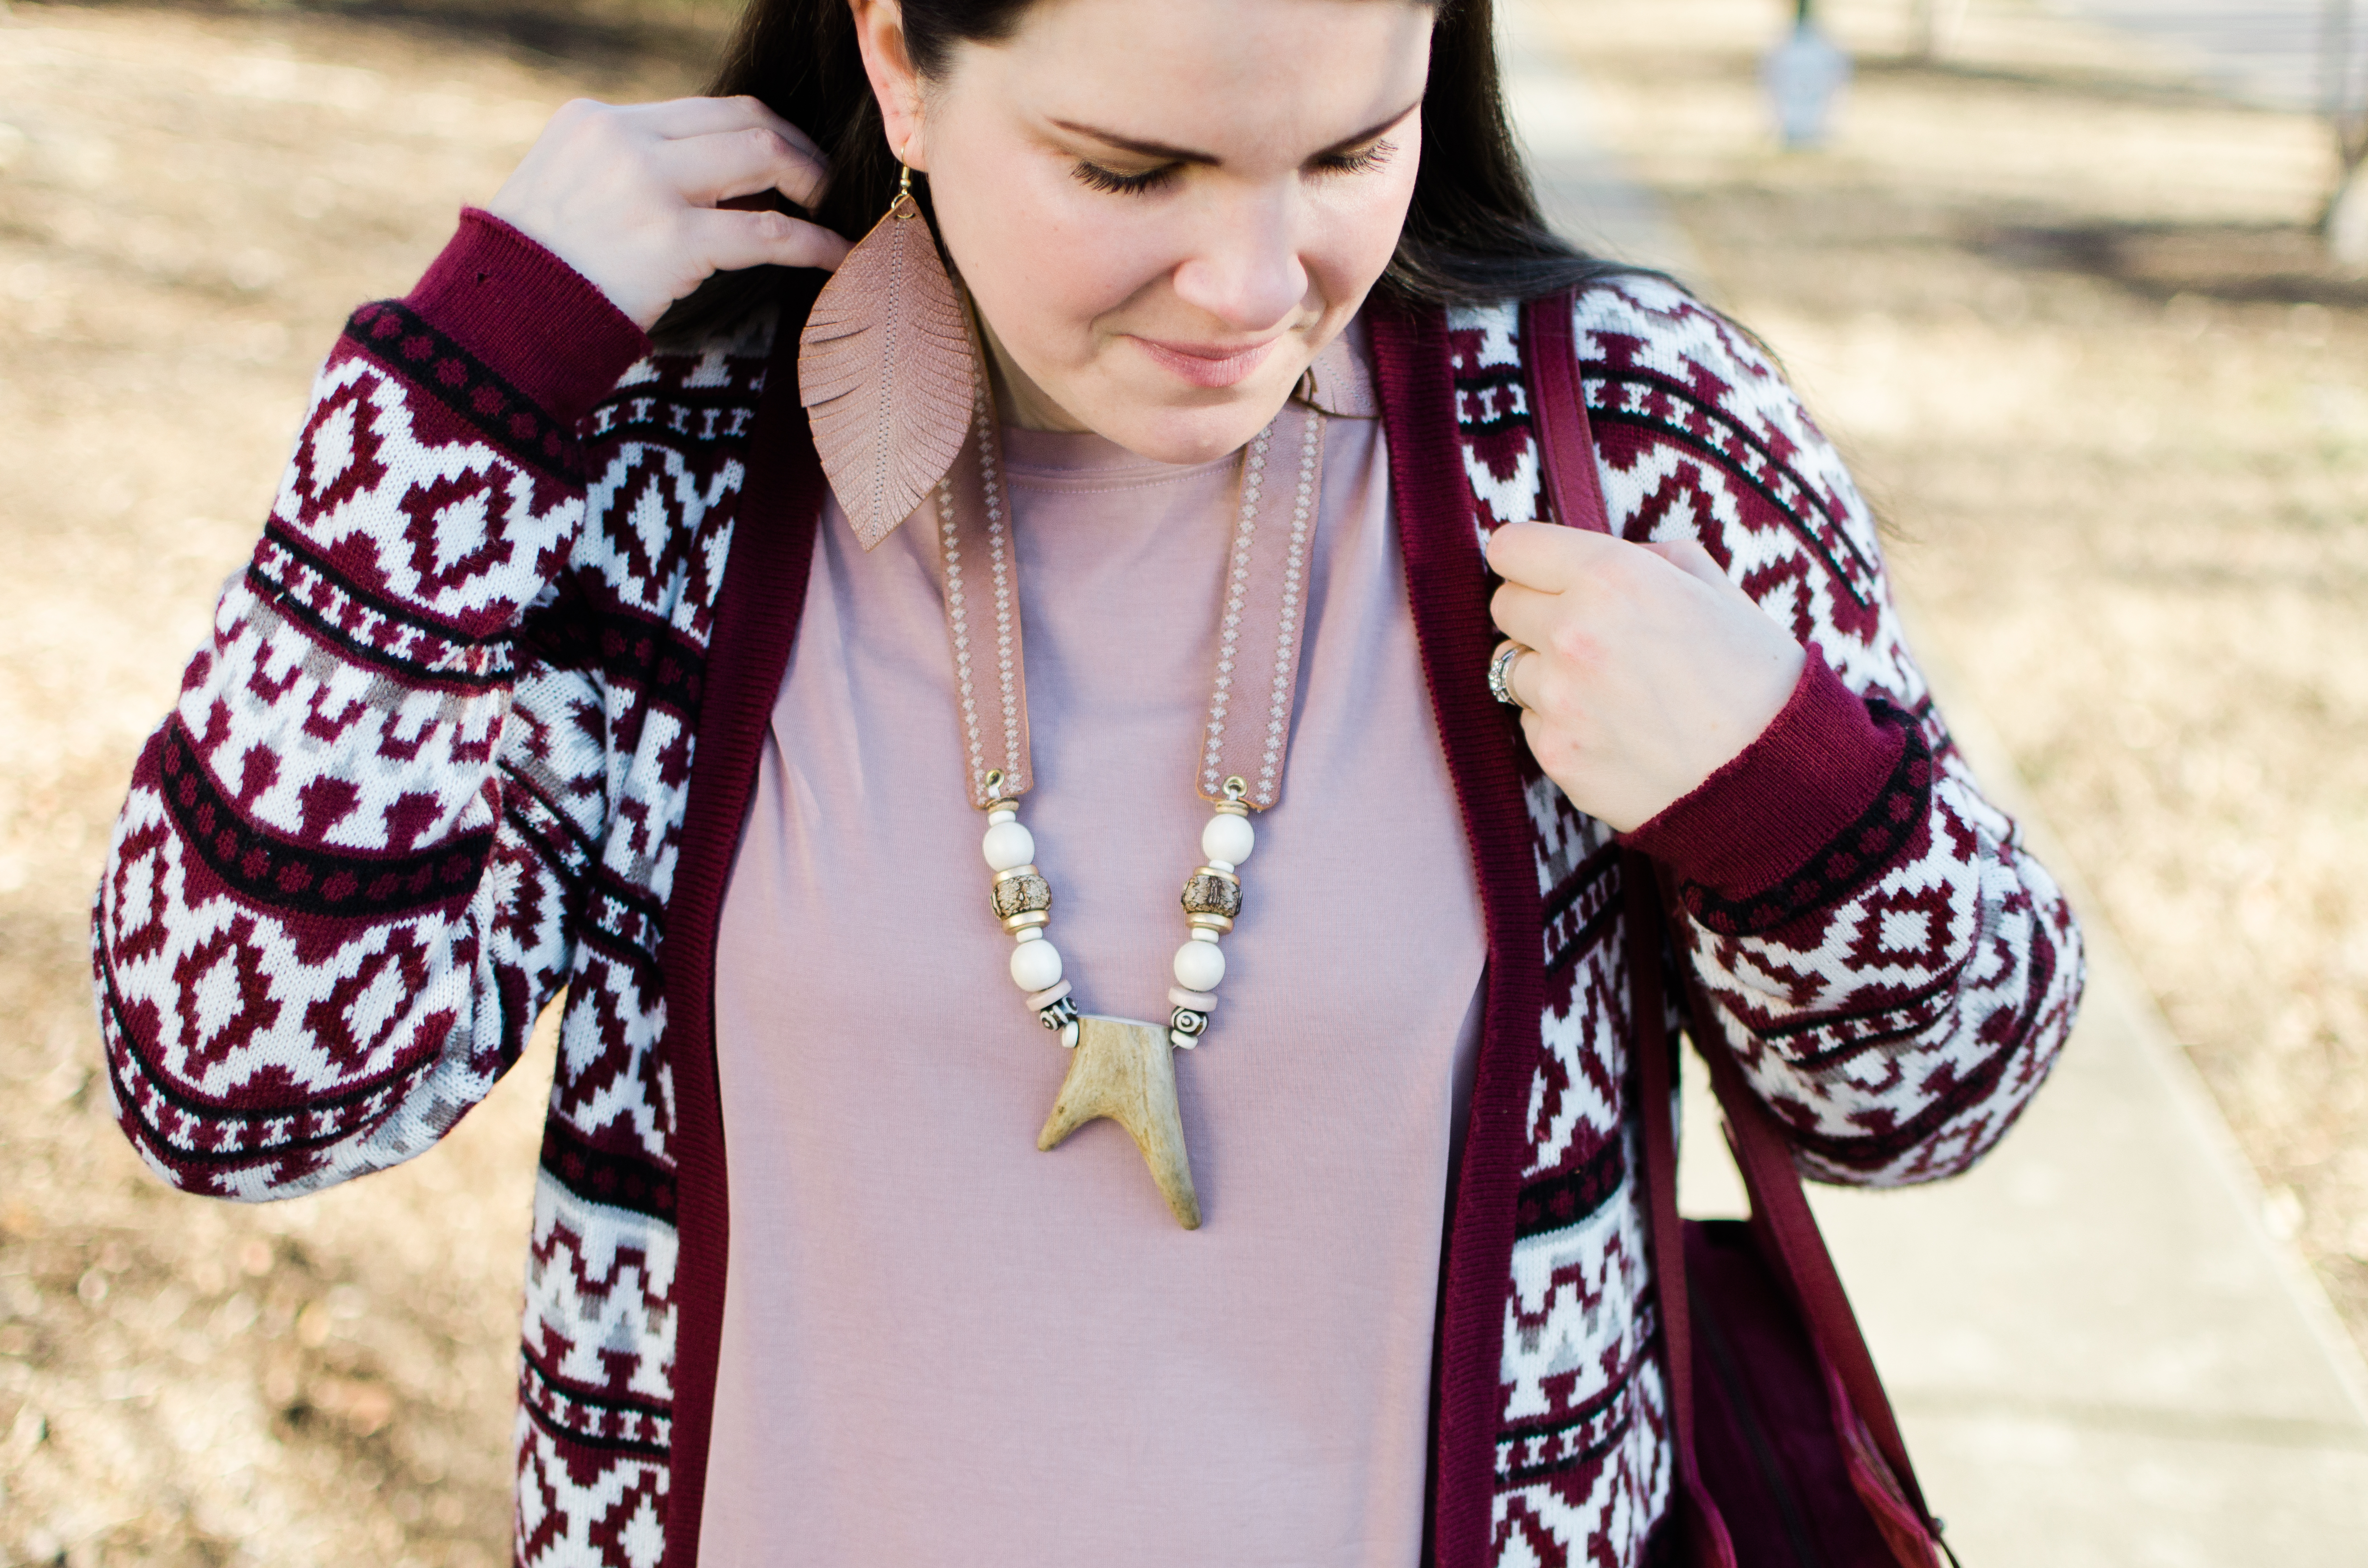 Designed for Joy, October Jaipur, The Root Collective, ethical fashion blogger, ethical style blogger (9 - Fighting Human Trafficking by popular North Carolina ethical fashion blogger Still Being Molly)